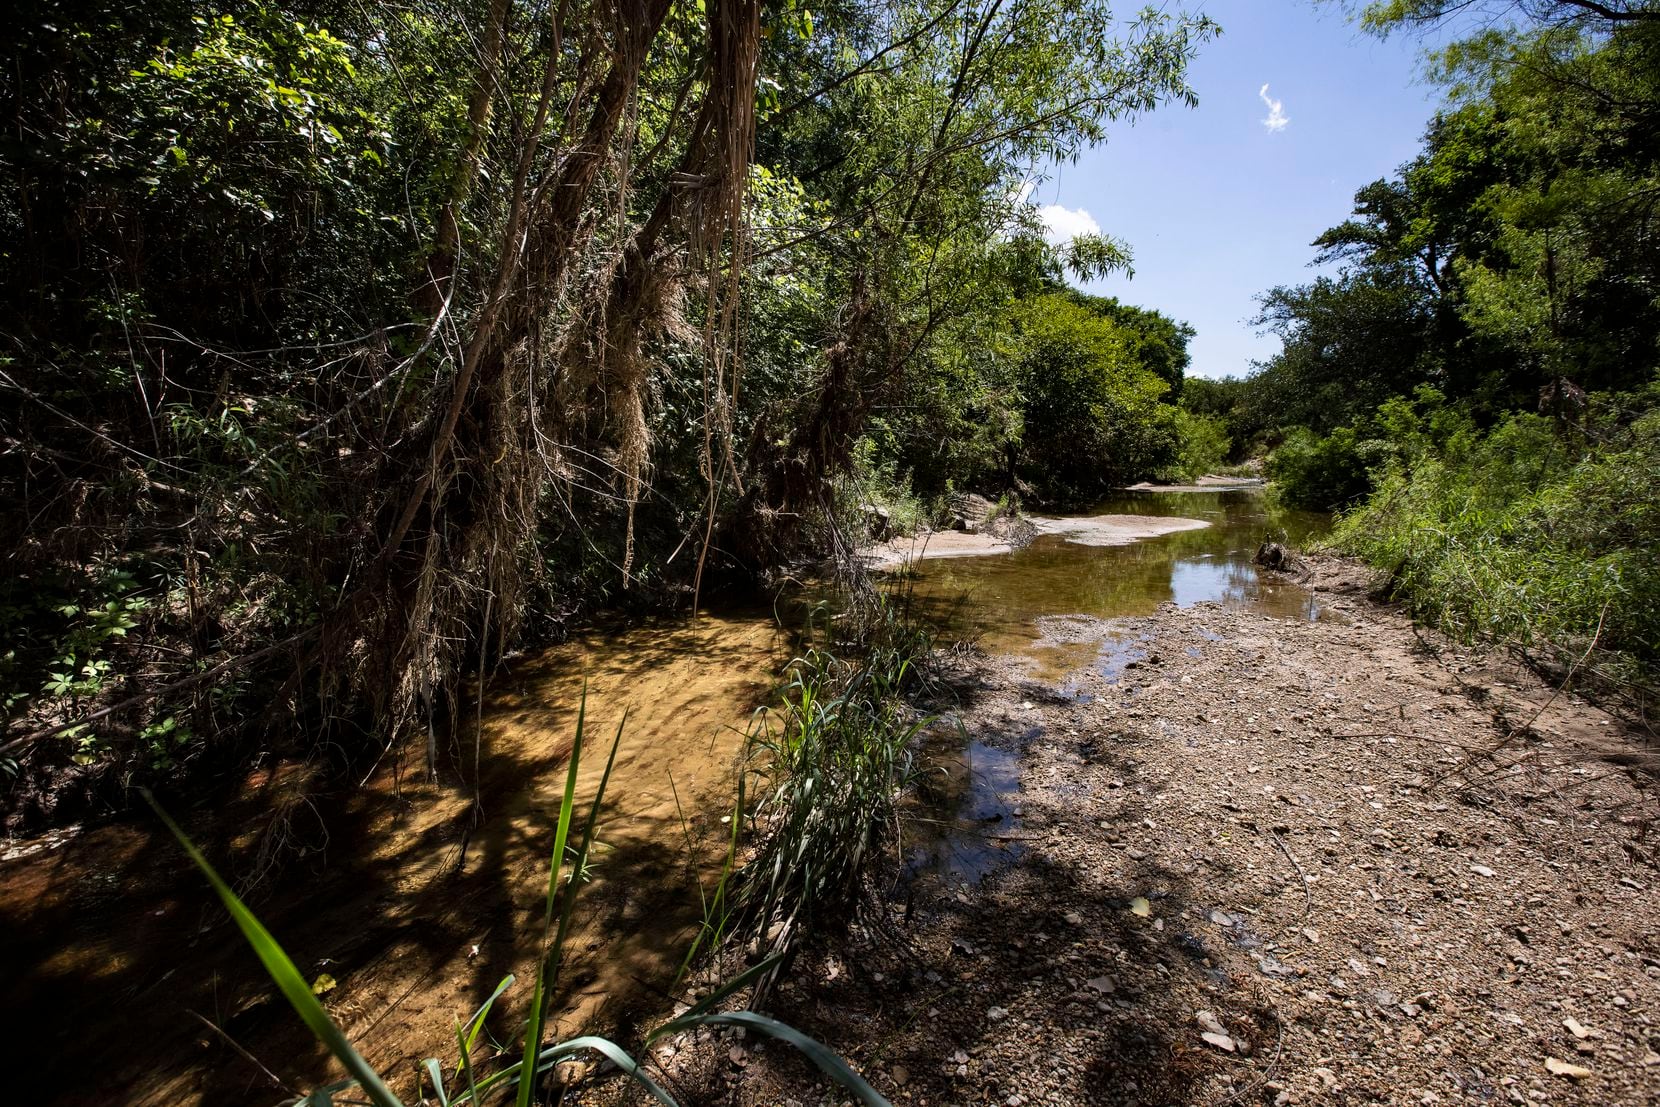 This sandy creek bed from the main road leads toward the home where Christopher Allen...